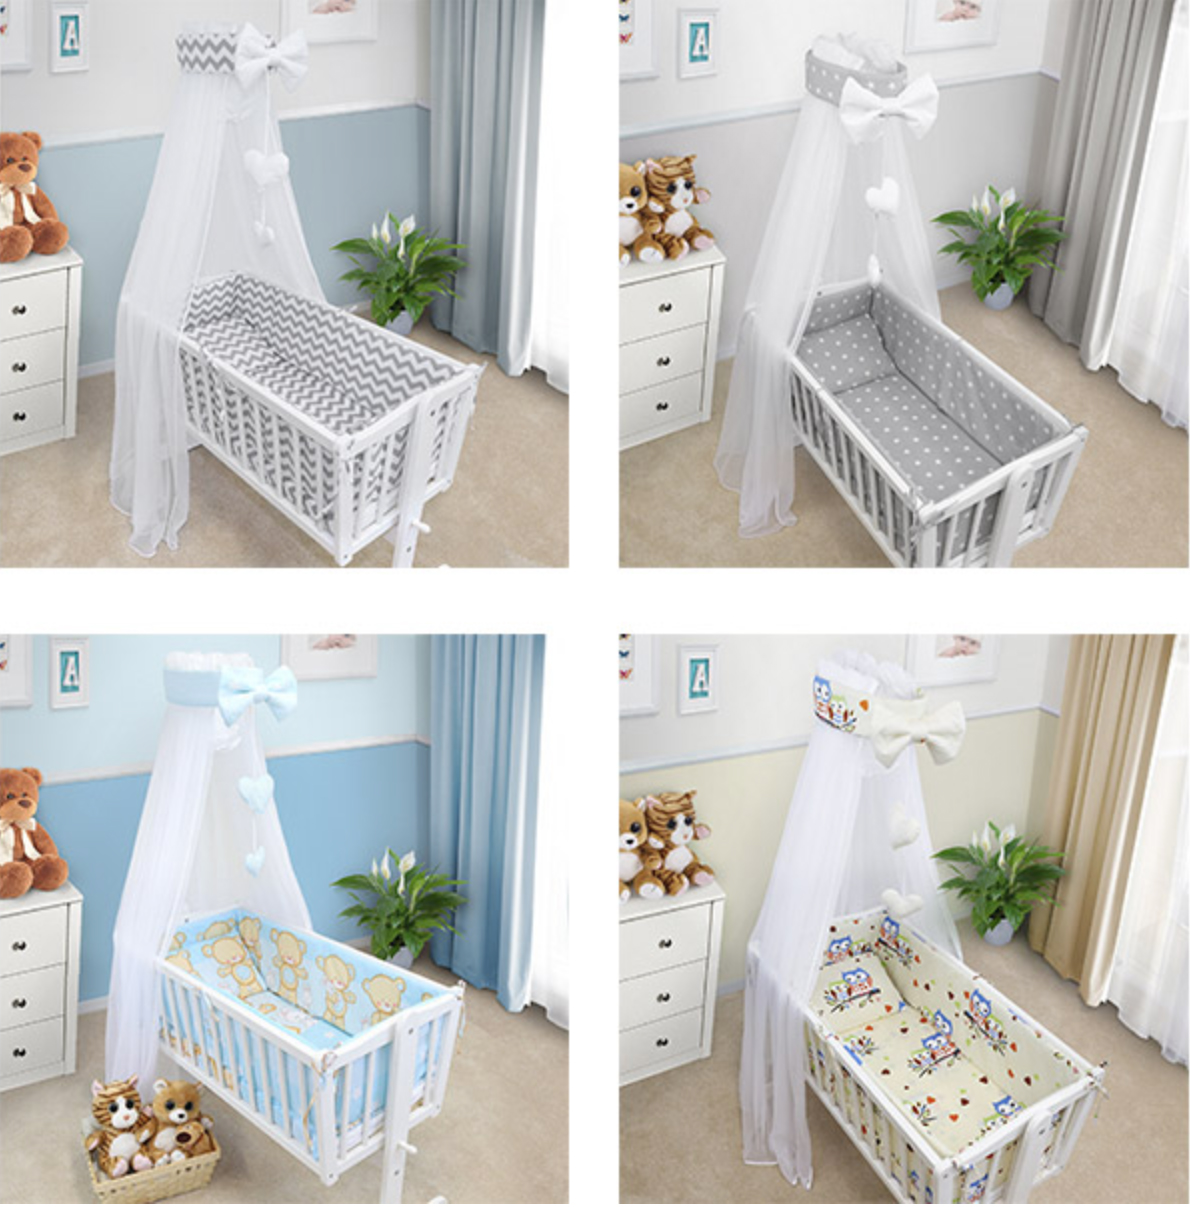 Lovely BABY Nursery COT TIDY /ORGANIZER to fit cot or cotbed 